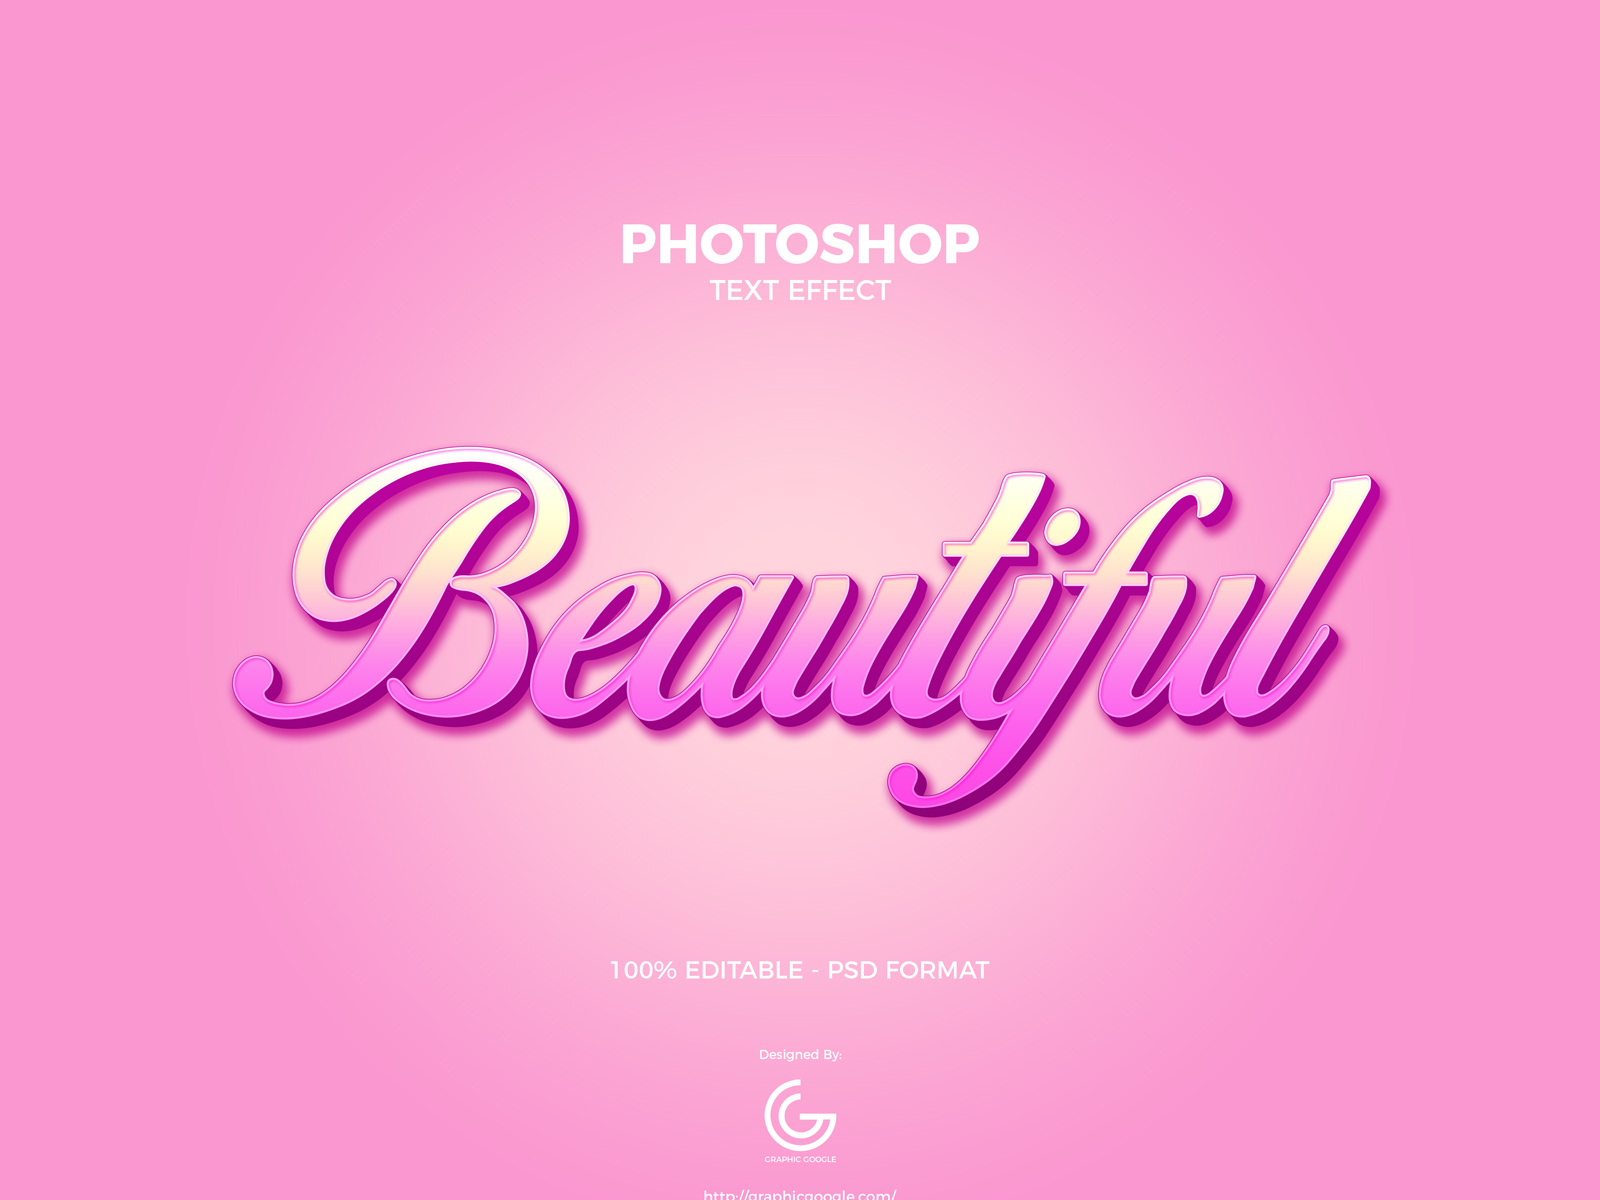 free text download for photoshop